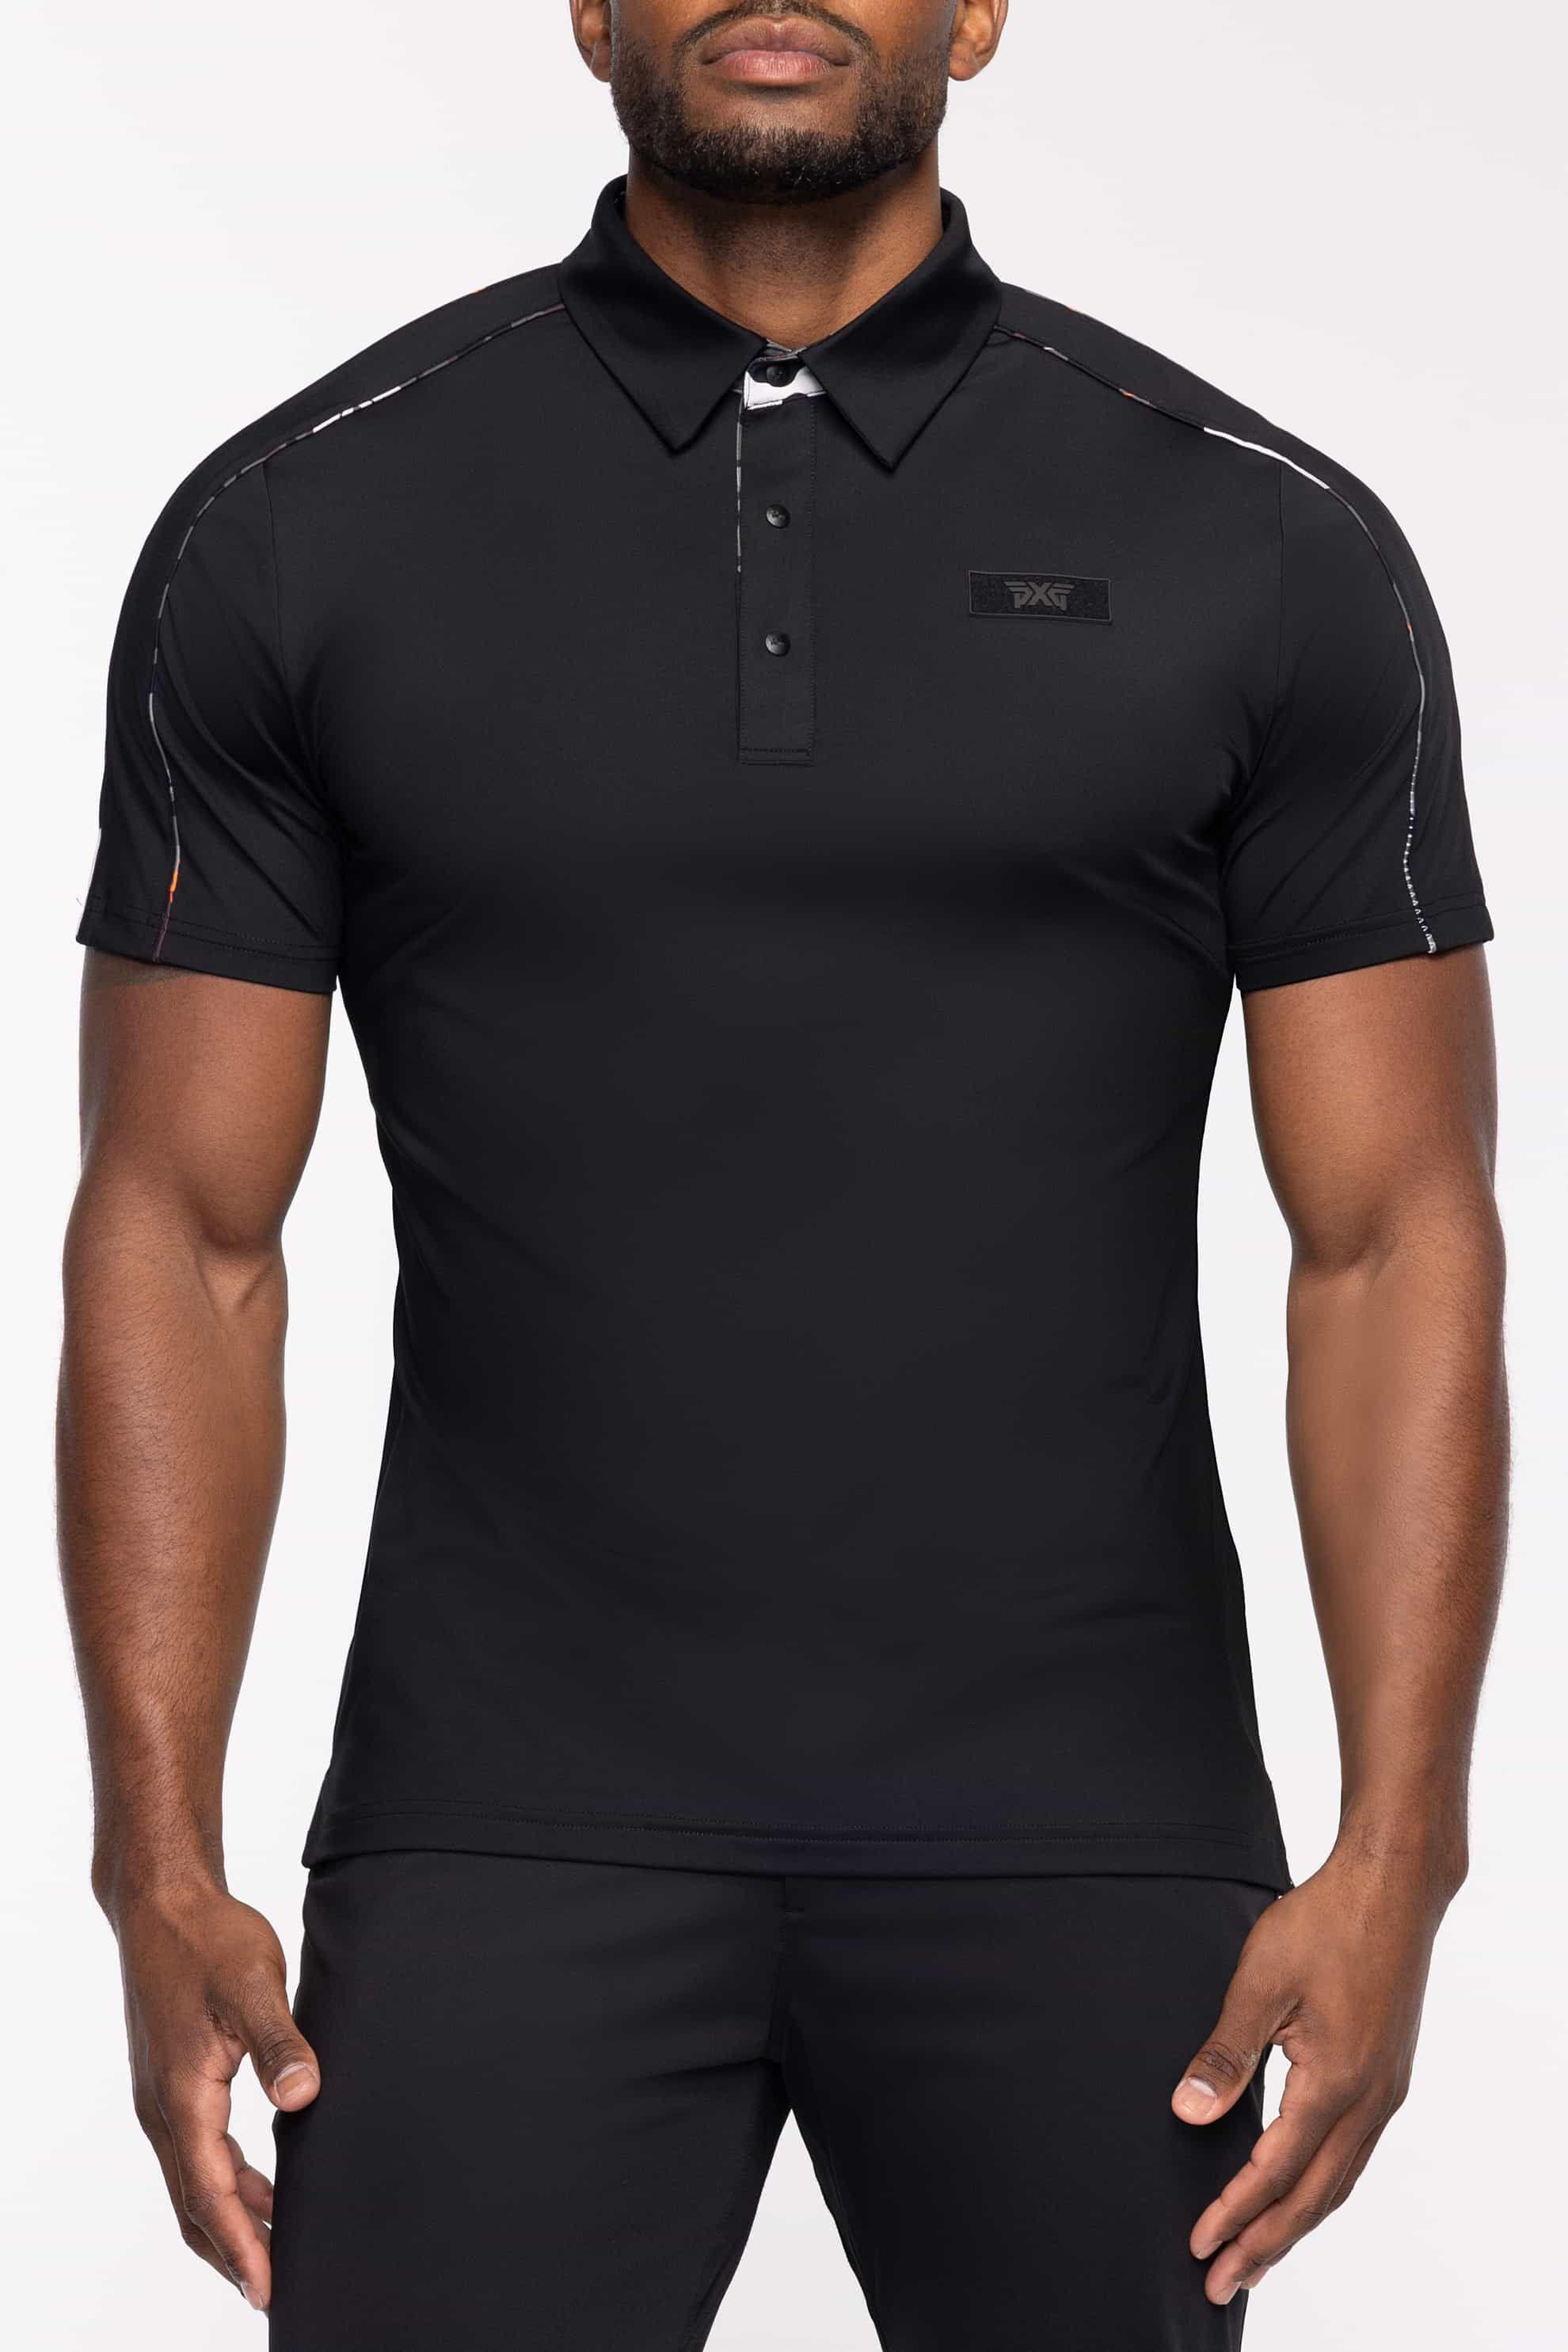 Shop Men's Golf Polos - Comfort and Athletic Fit